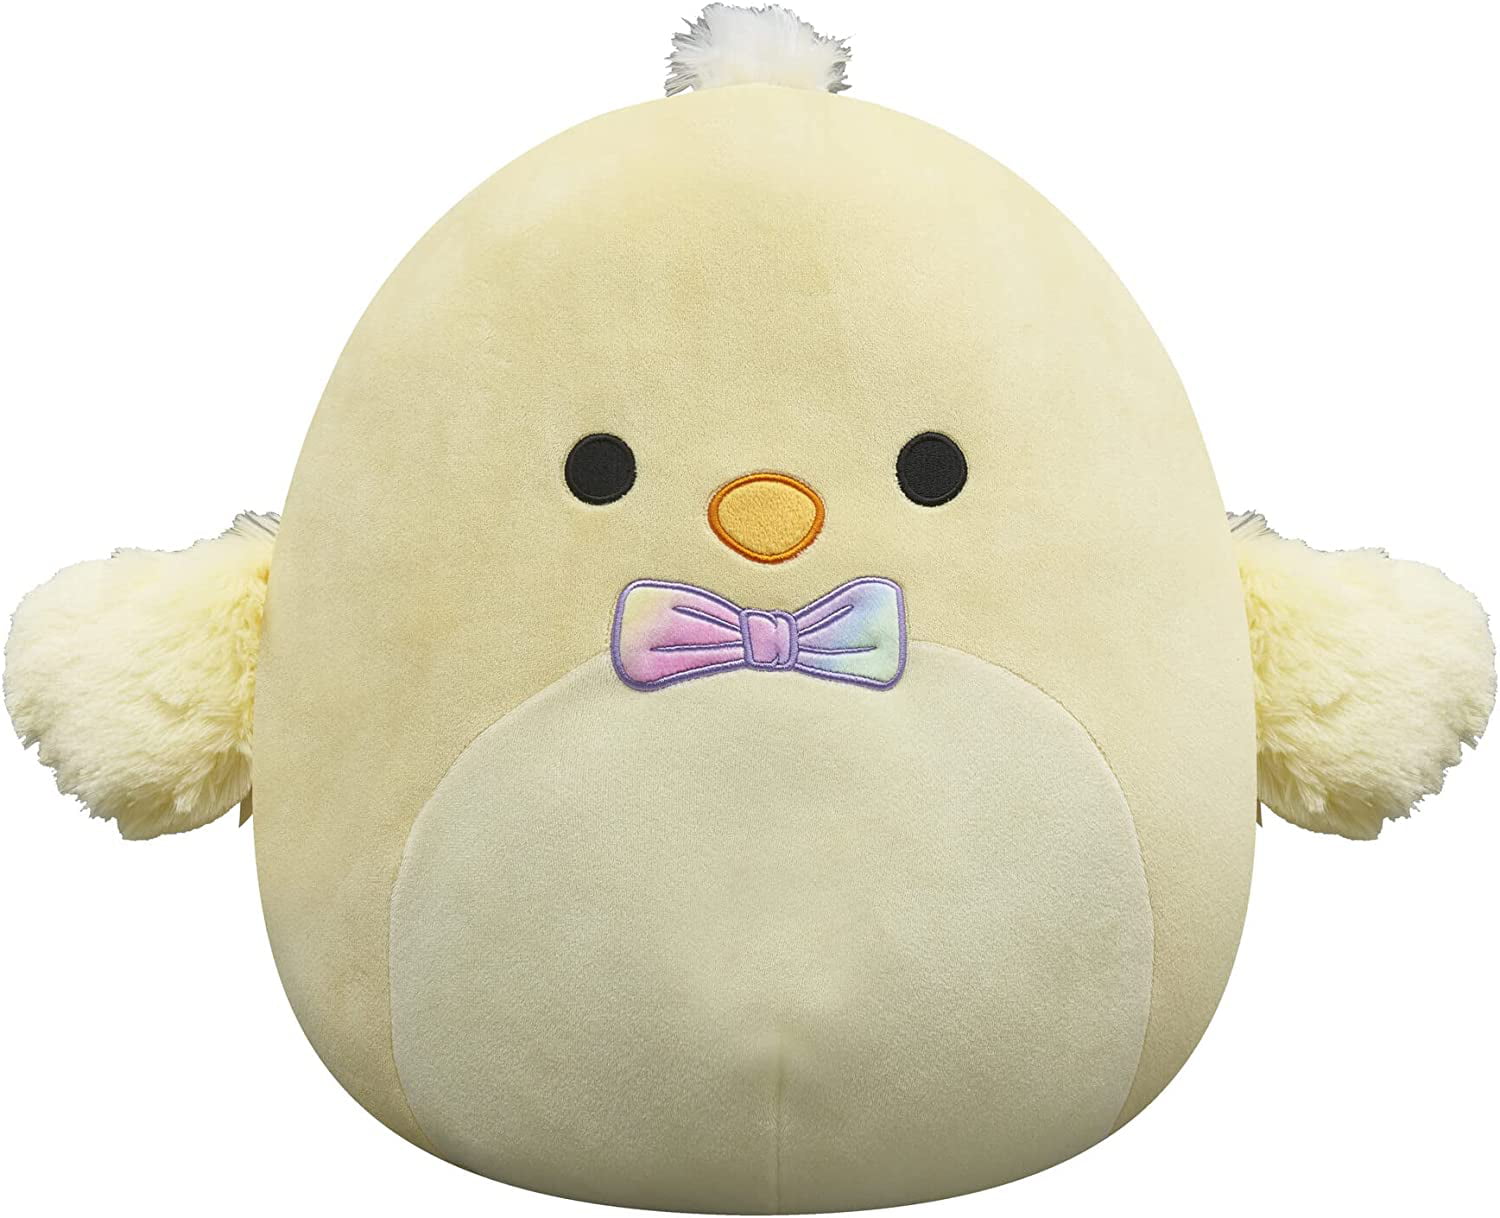 14" Squishmallows Official Kellytoy Plush Toy (Triston the Chick) $10.95 + FS w/ Walmart+ or FS on $35+